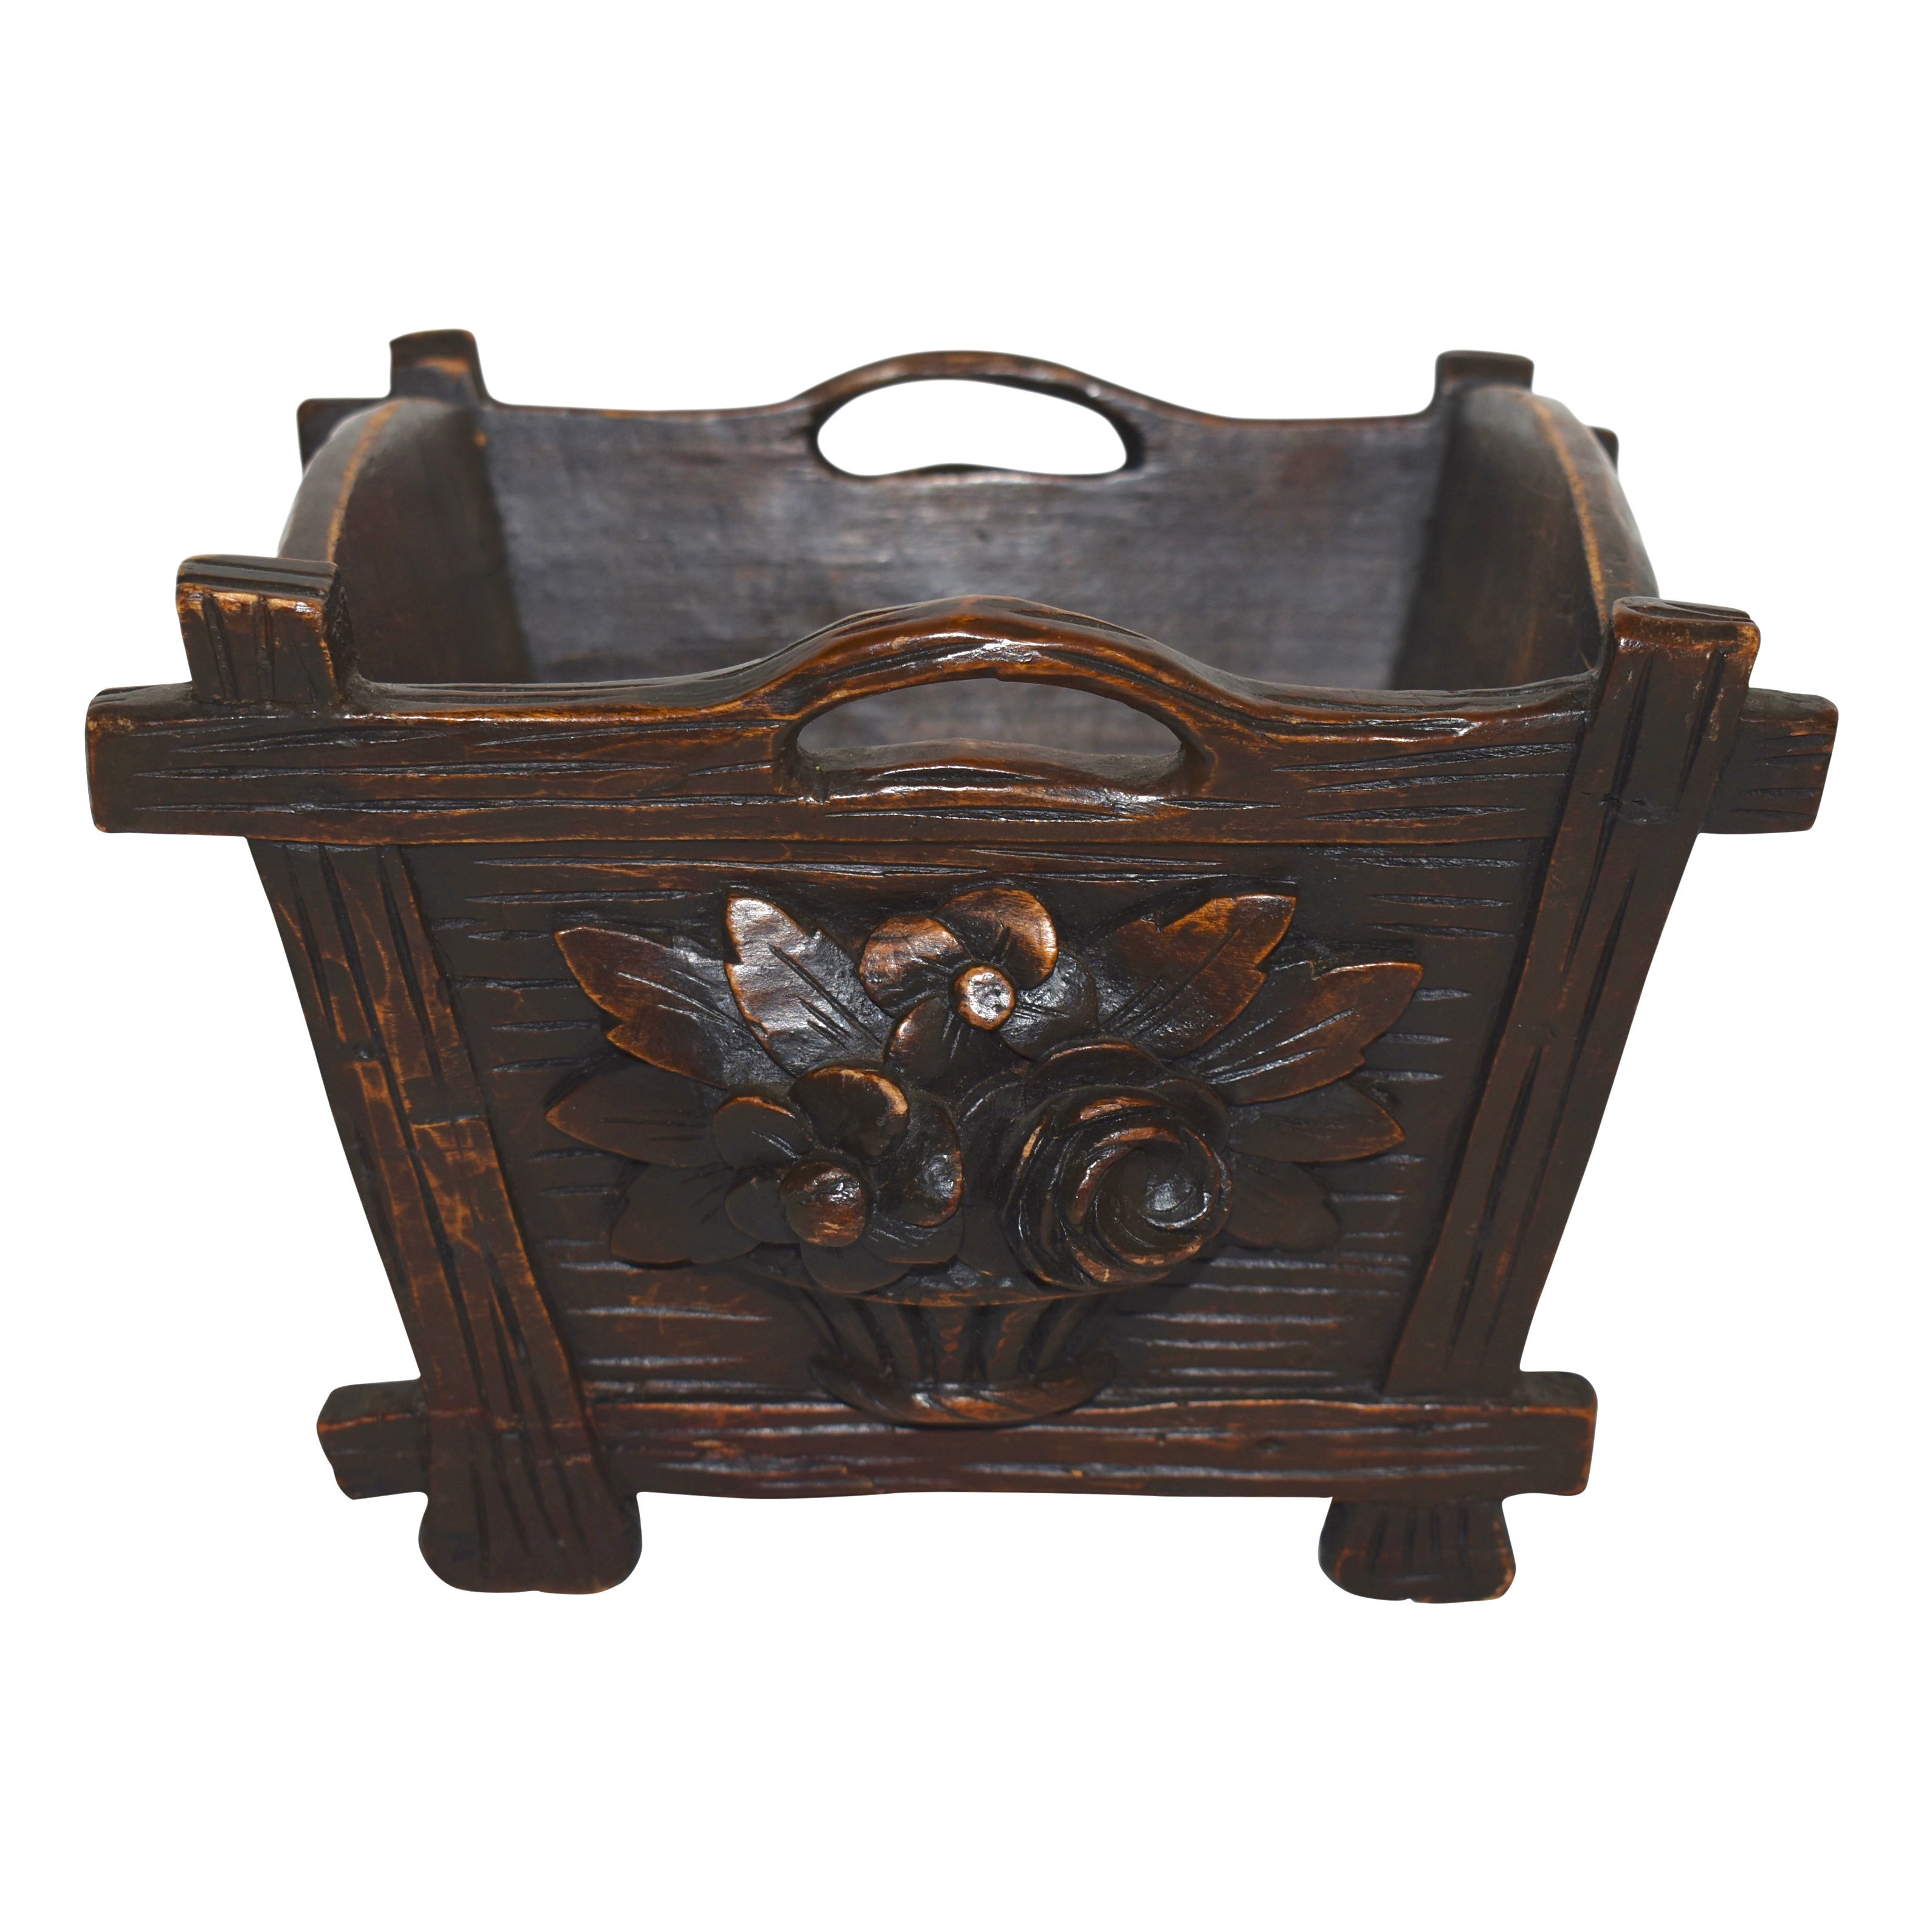 Carved Wooden Bucket